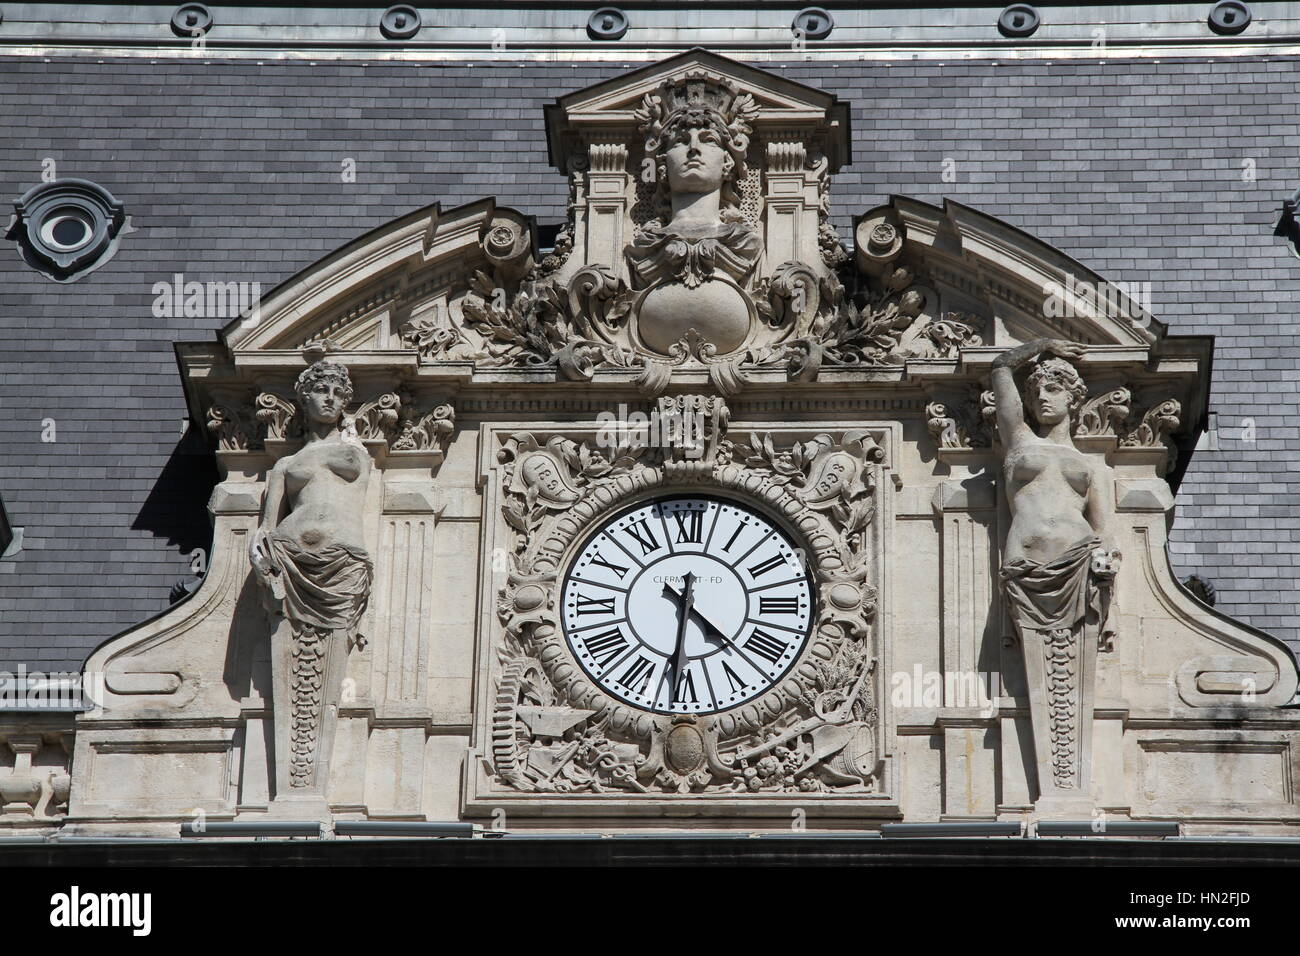 The clock on the facade of the Opéra-Théâtre de Clermont-Ferrand, Place de Jaude, Auvergne, France. Inaugurated 1894. Architect Jean Teillard. Stock Photo